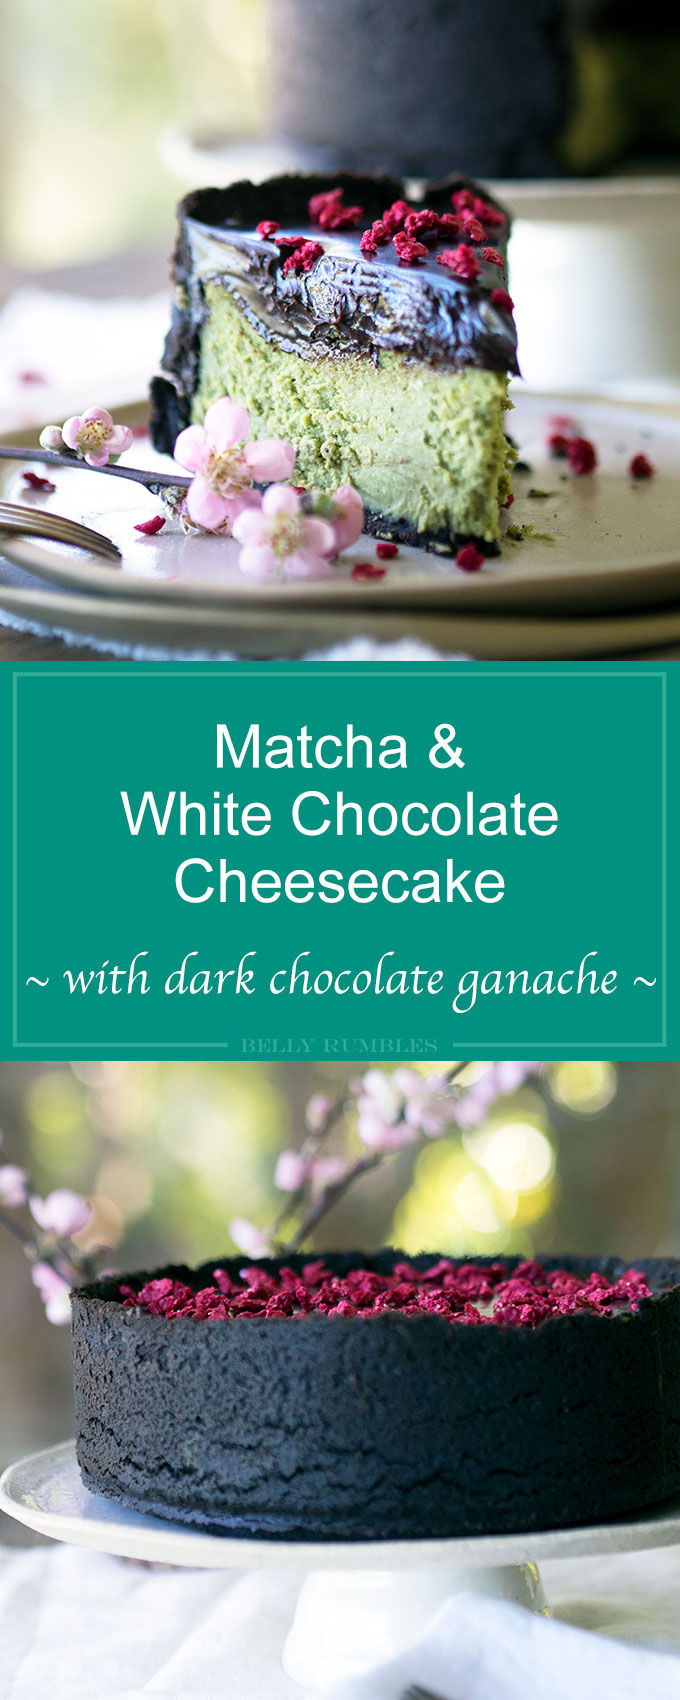 This is the best matcha white chocolate cheesecake recipe that you will come across. Smooth and creamy baked perfection with an Oreo base. All topped with decadent dark chocolate ganache.